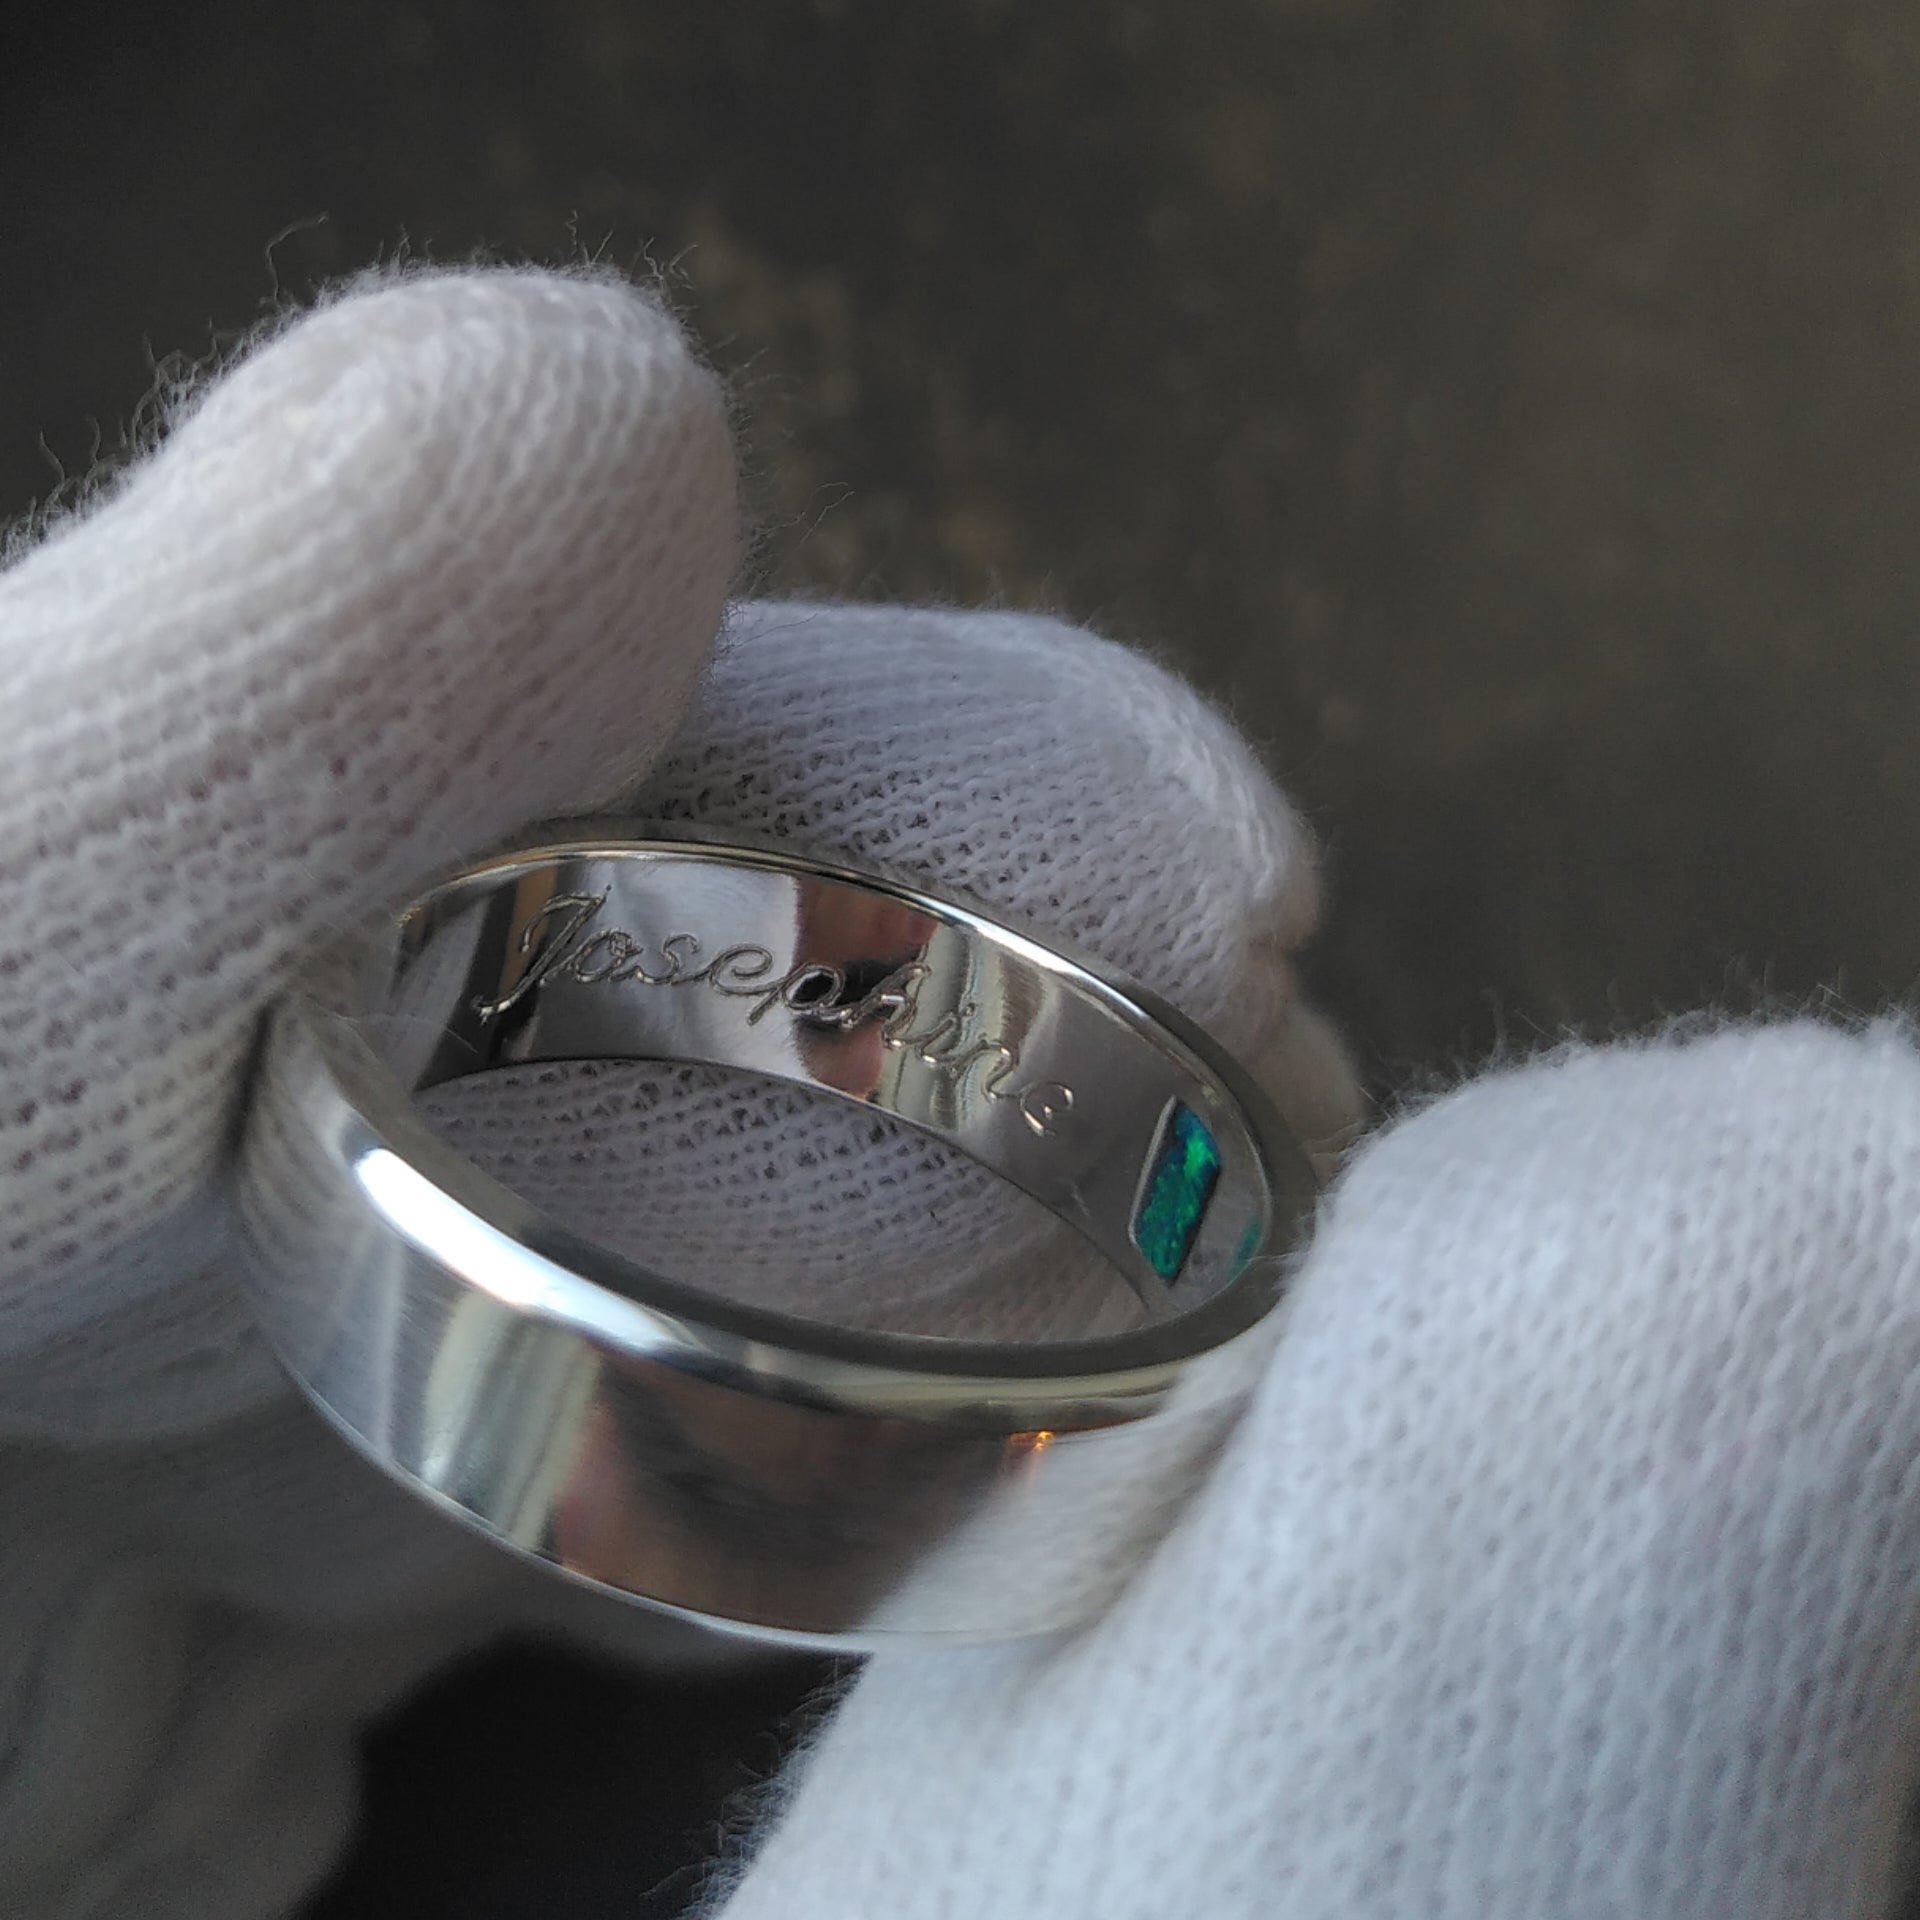 A thick sterling silver ring in which the name Josephine is engrave. Inside the ring, a small squared opal in strong green blue colors is set. Made by hand by CASEZ Jewellery.